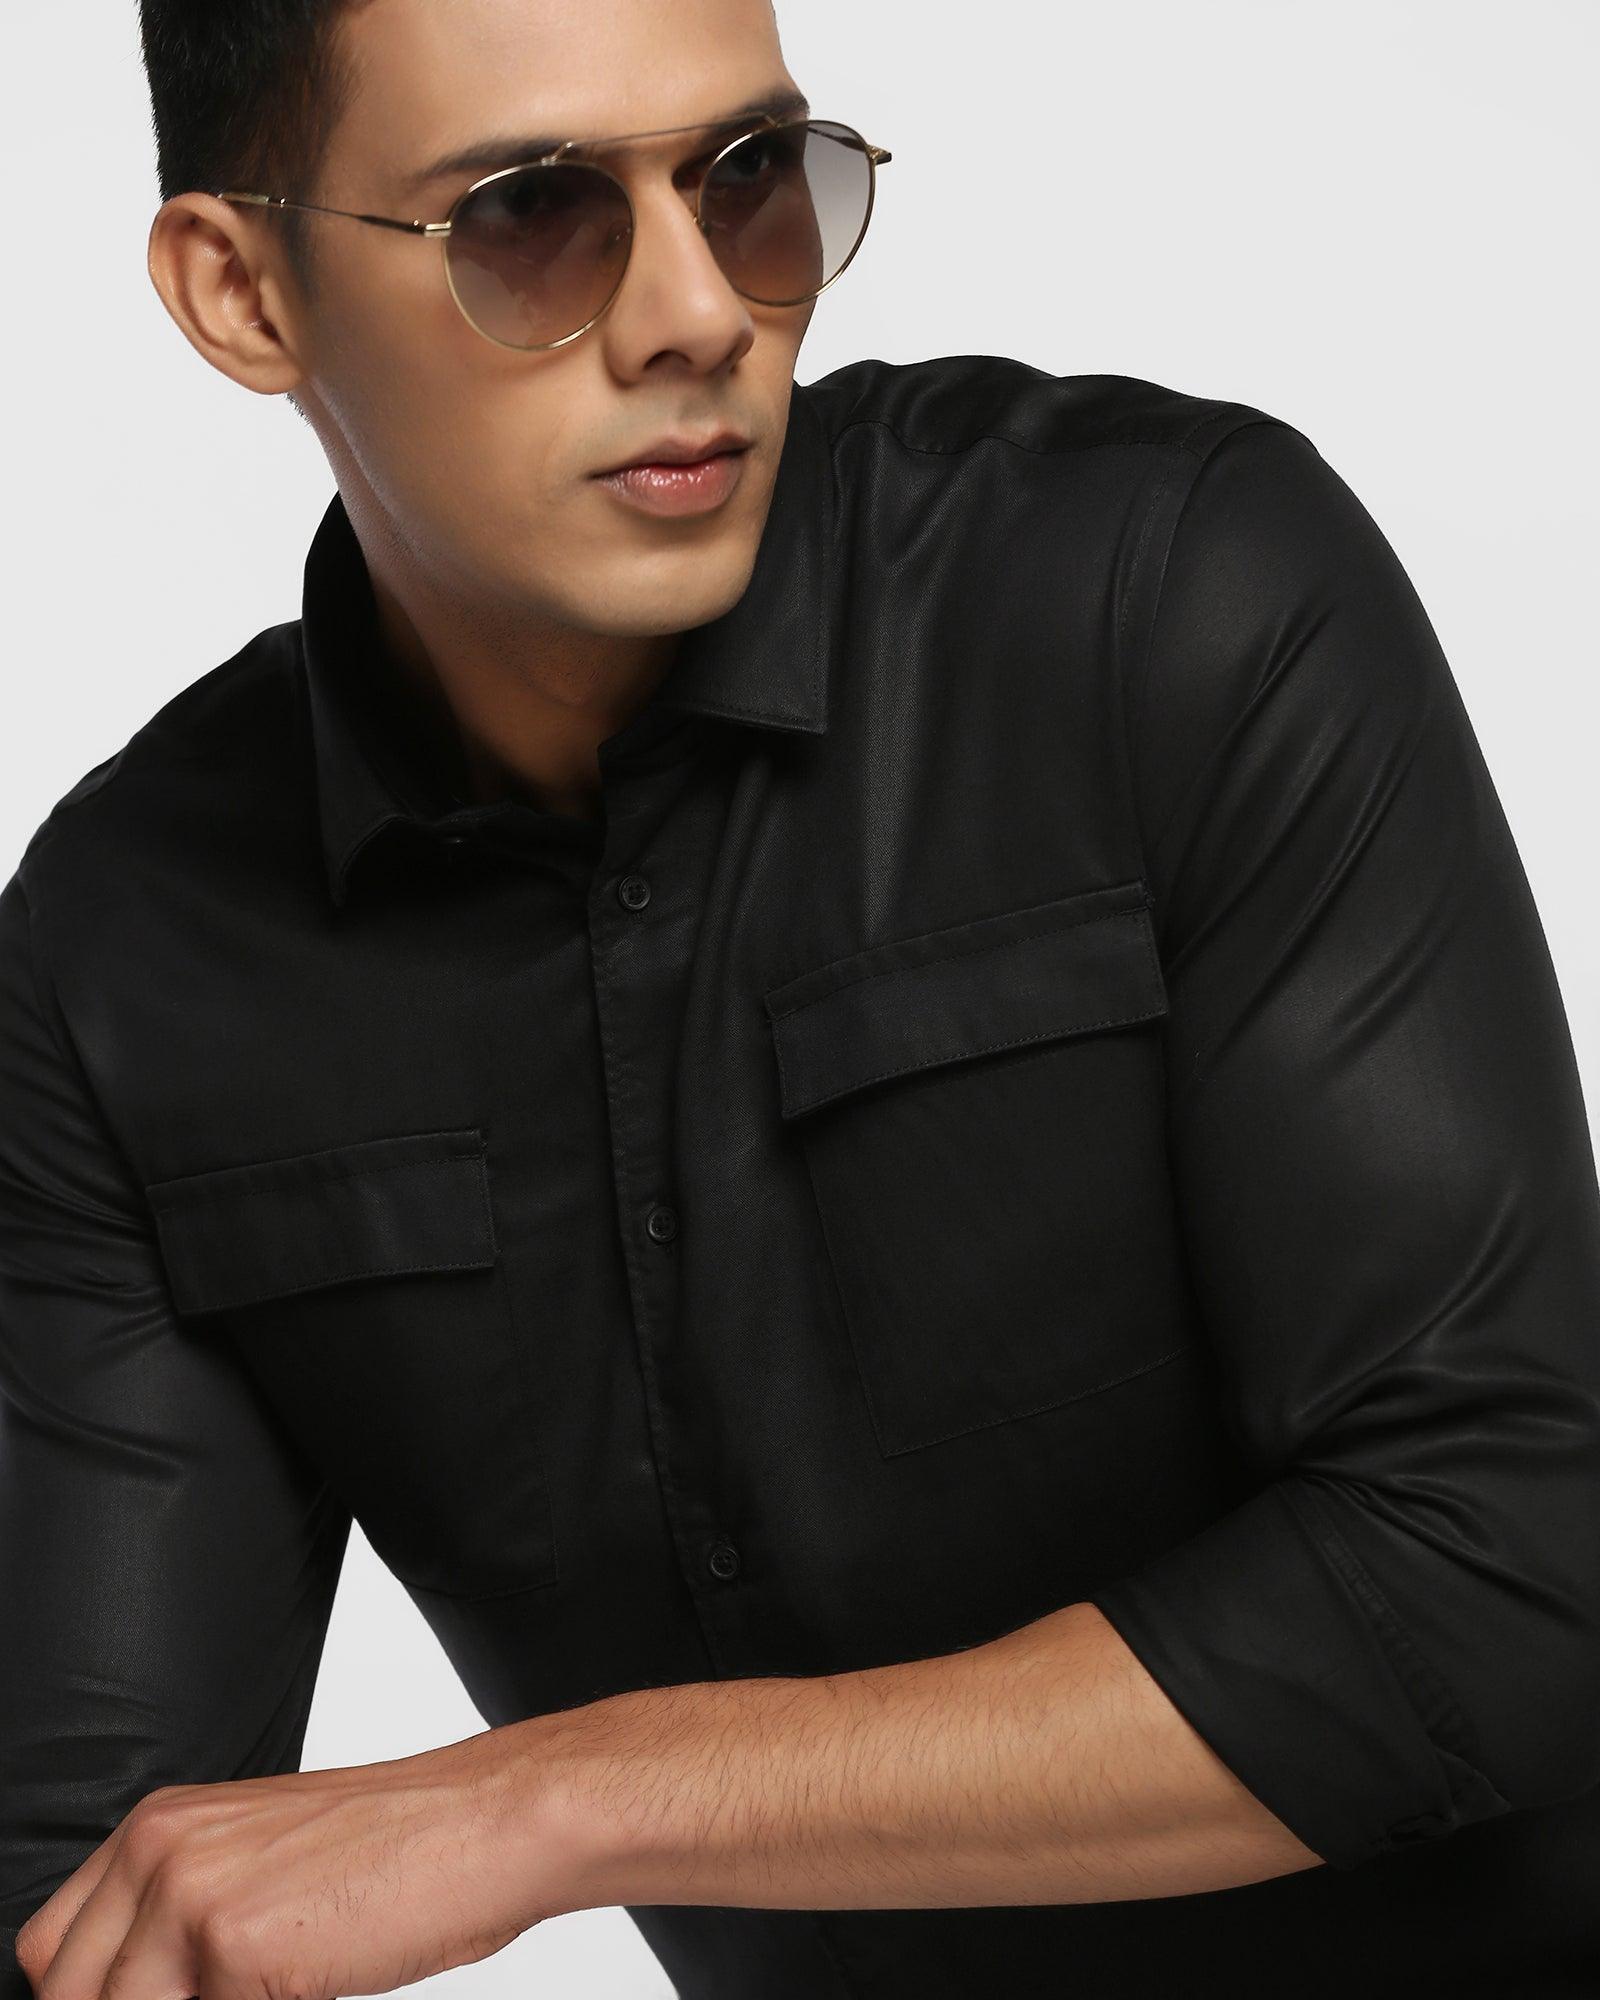 Casual Black Solid Shirt - Zing